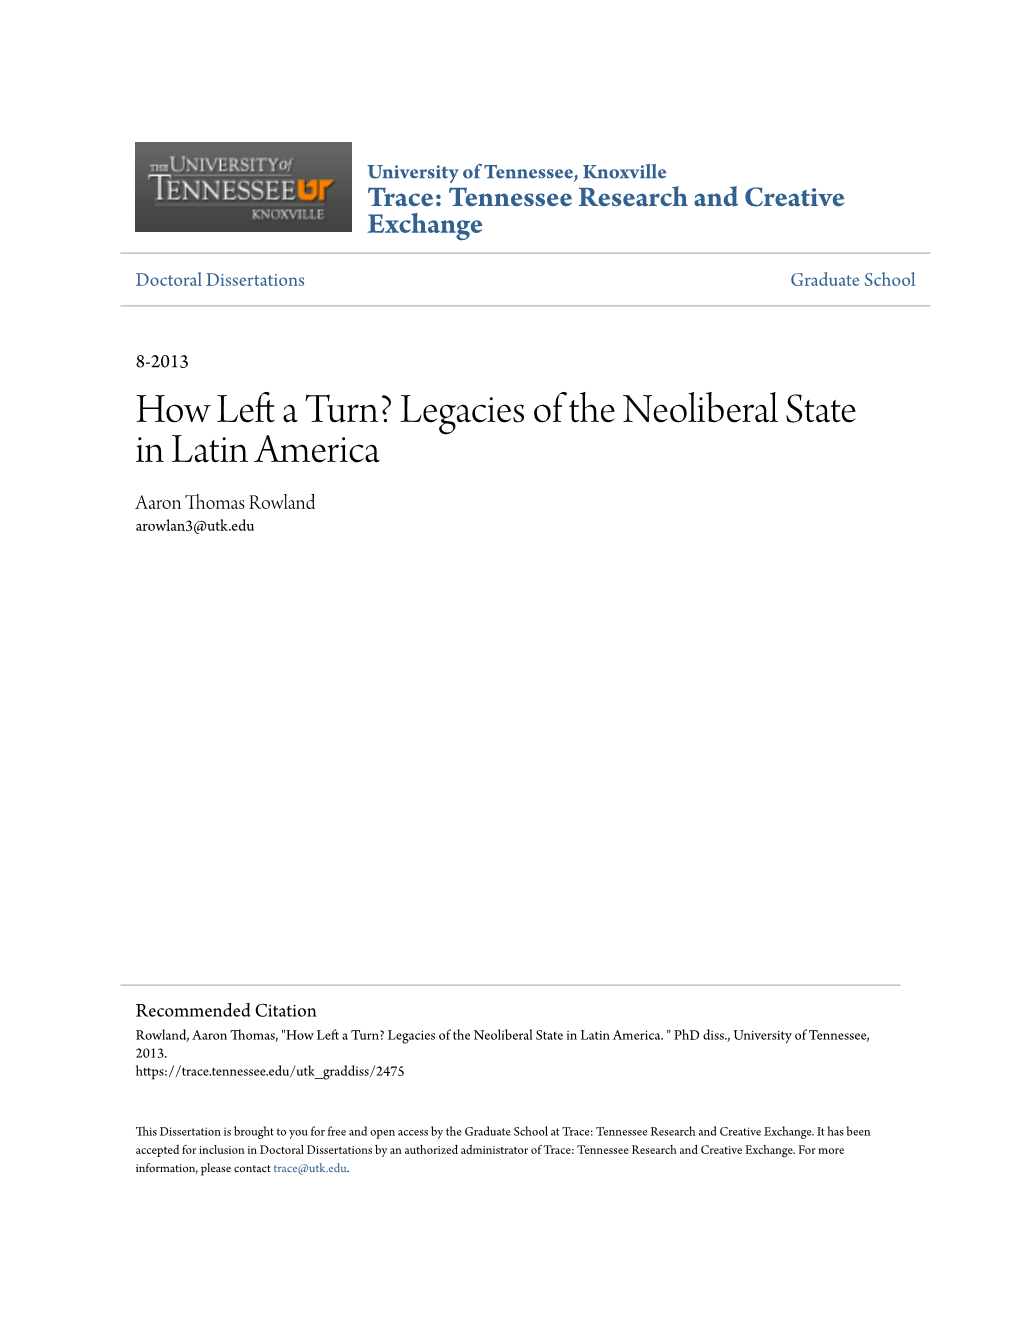 How Left a Turn? Legacies of the Neoliberal State in Latin America